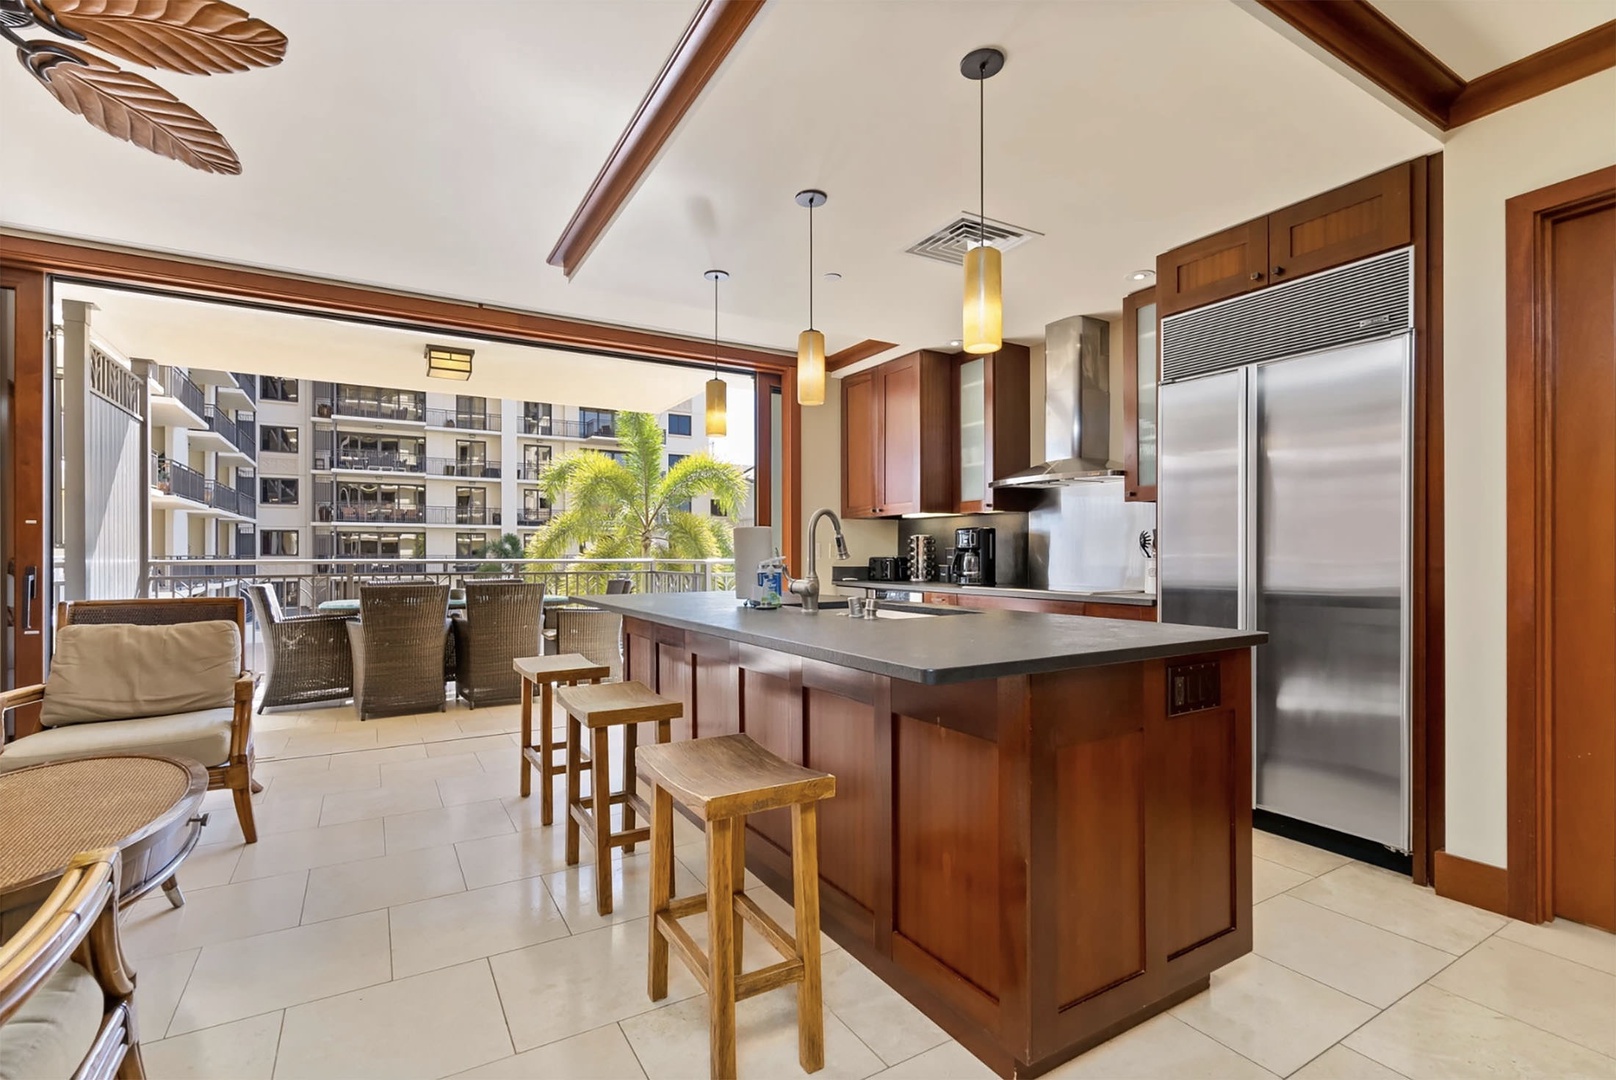 Kitchen with a large fridge and barstool seating at the island